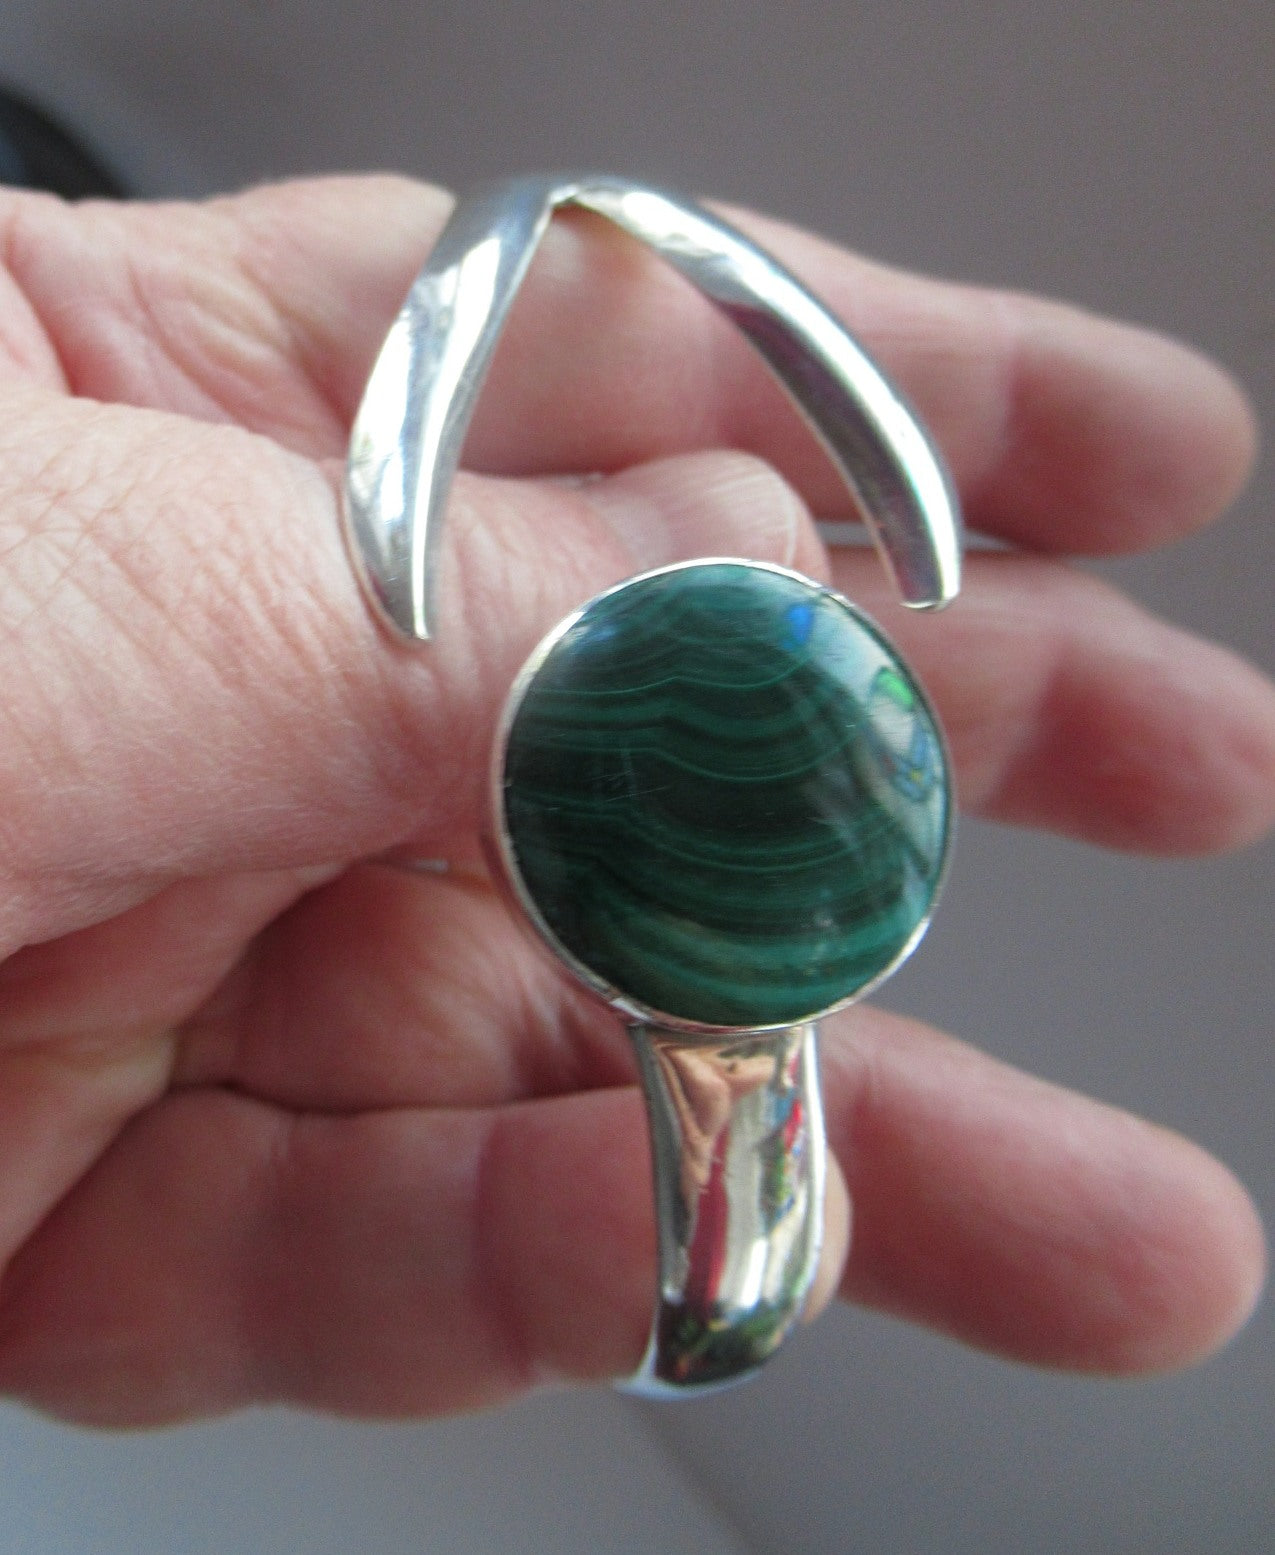 Vintage Multi Gemstone Bangle Hook Bracelet TM-283 Taxco Sterling Silver  925 Mexico Featuring Lapis and Green Malachite Stones 